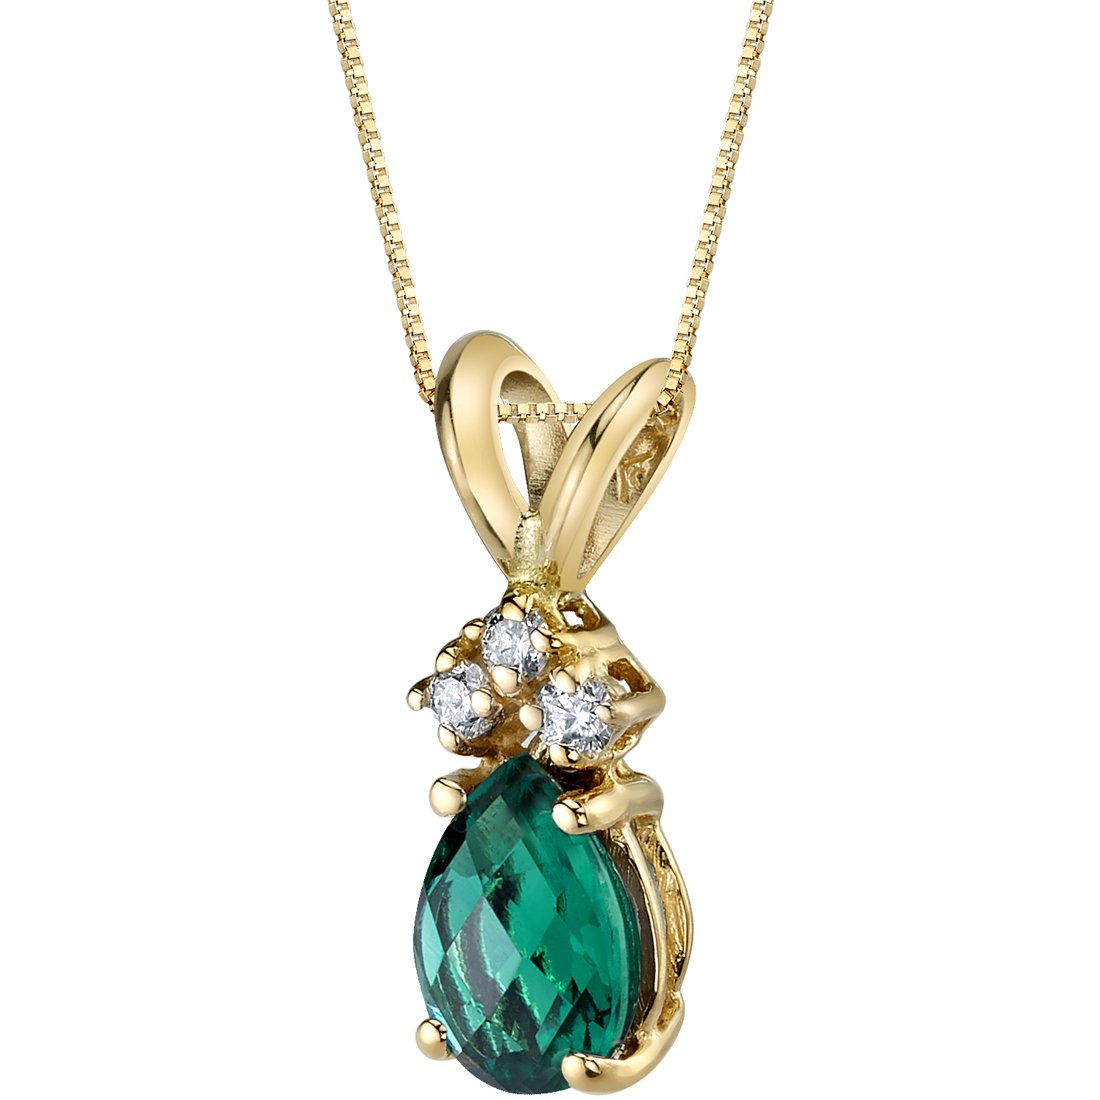 Peora Solid 14K Yellow Gold Created Emerald with Genuine Diamonds Pendant for Women, Dainty Teardrop Solitaire, Pear Shape, 7x5mm